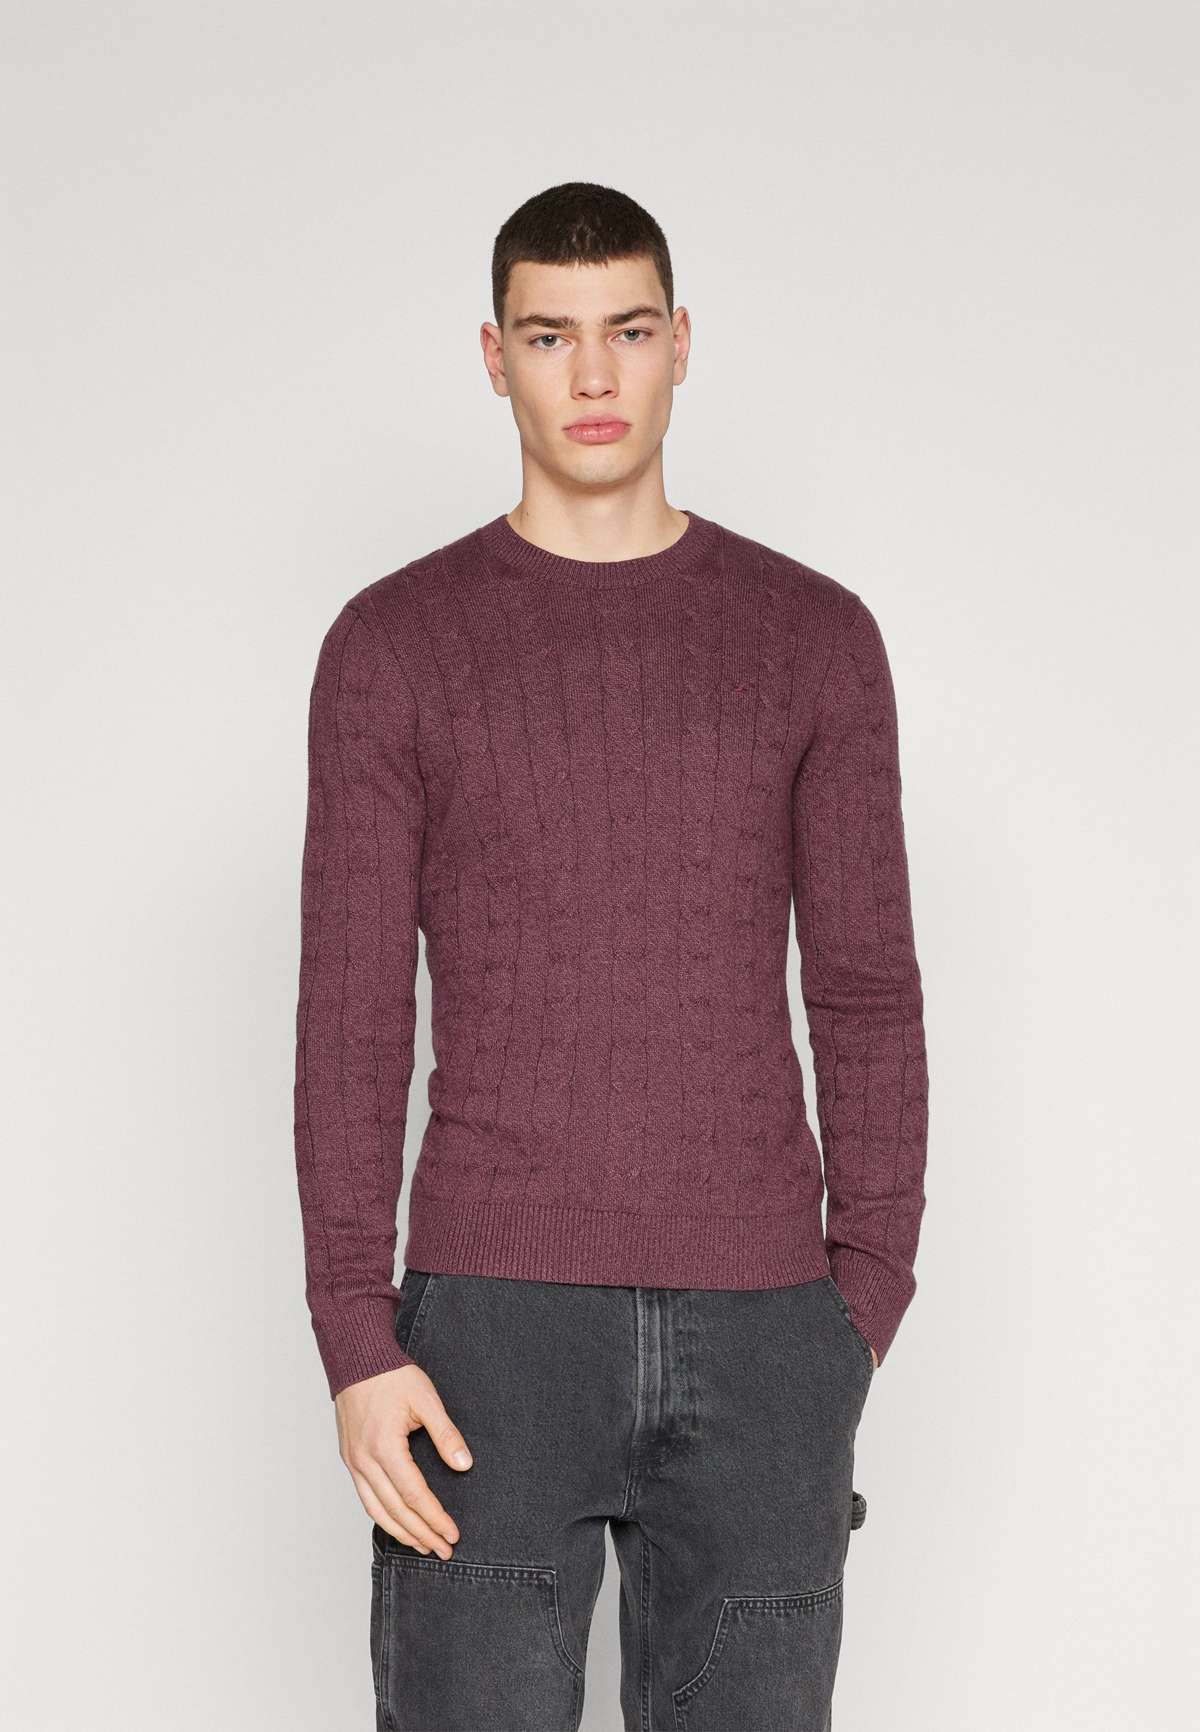 Пуловер LIGHTWEIGHT CABLE-KNIT CREW SWEATER LIGHTWEIGHT CABLE-KNIT CREW SWEATER